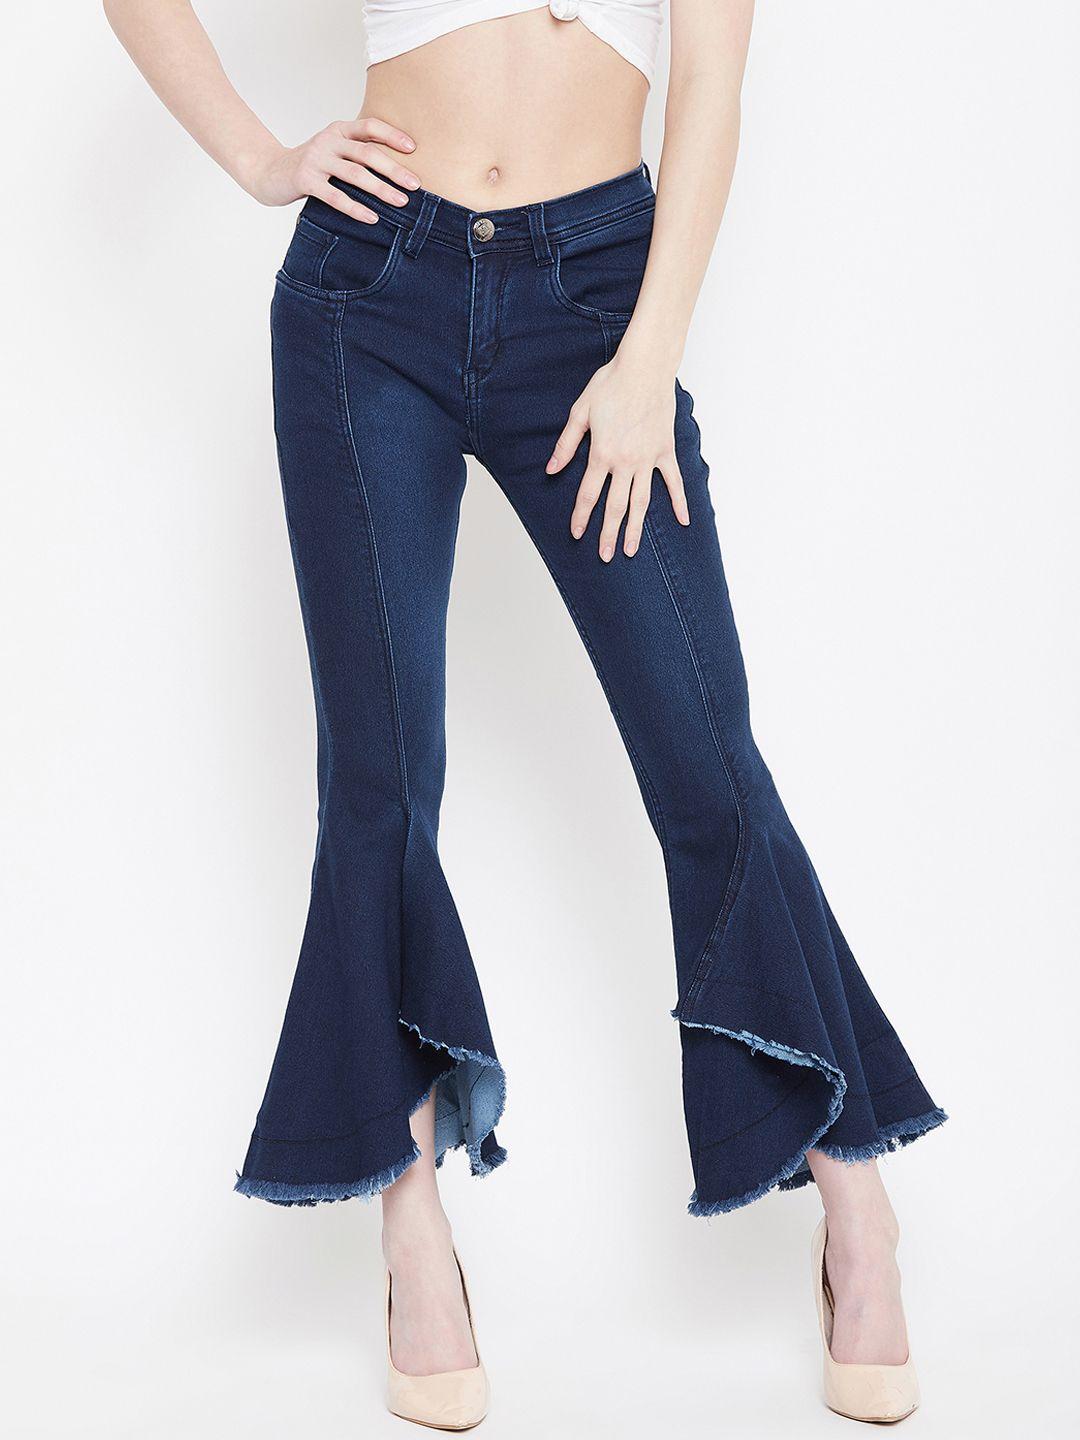 nifty-women-blue-flared-mid-rise-clean-look-stretchable-jeans